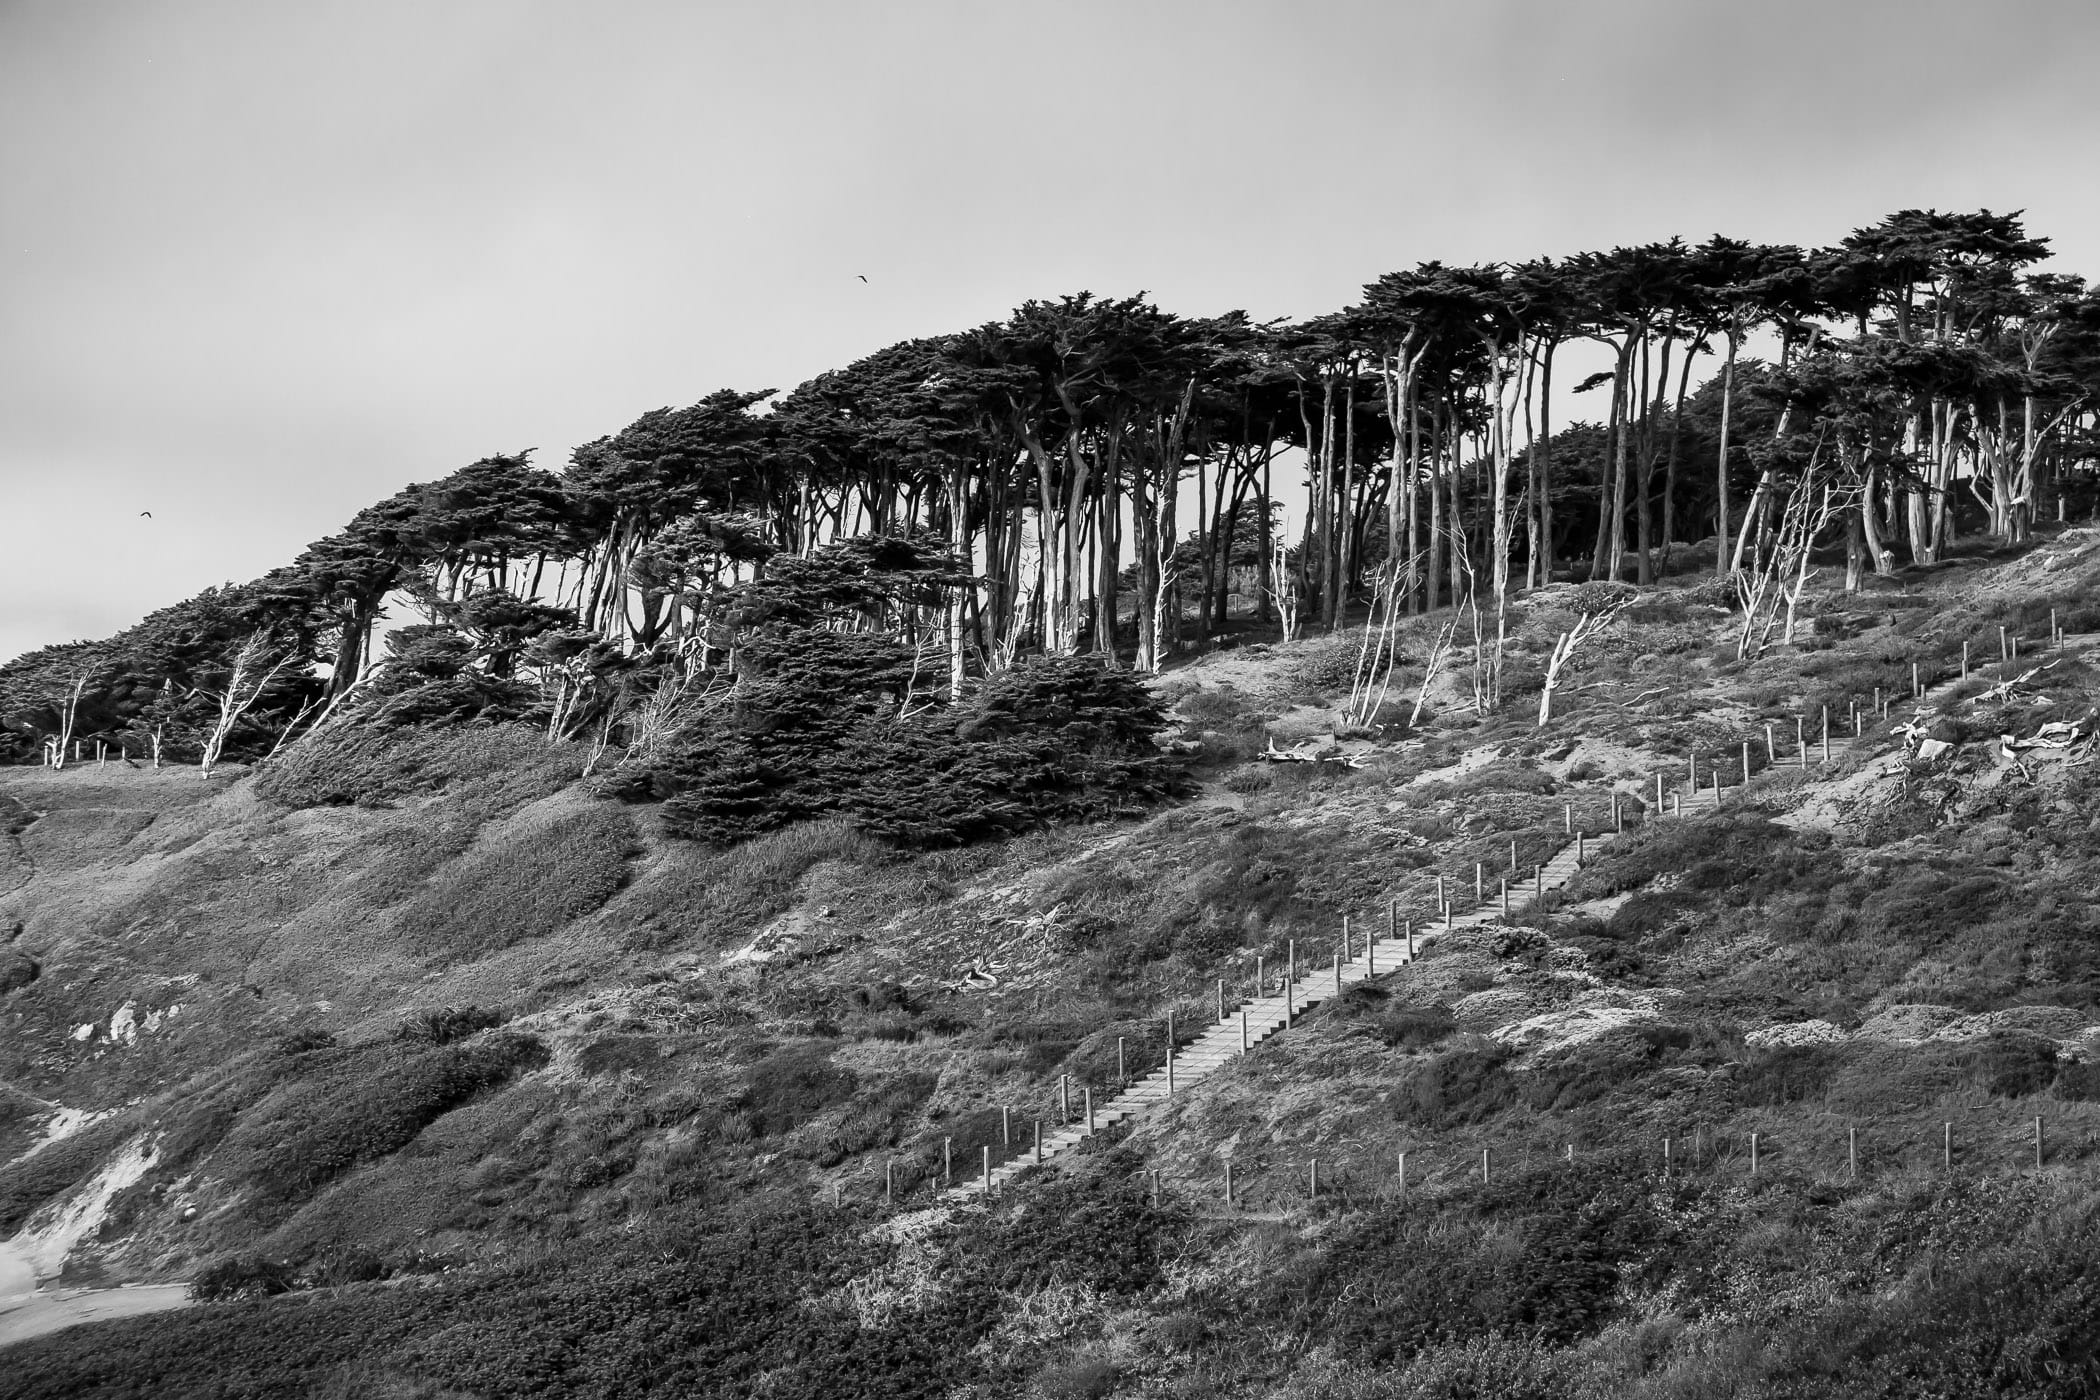 Trees line a ridge overlooking Sutro Baths at Lands End, San Francisco.